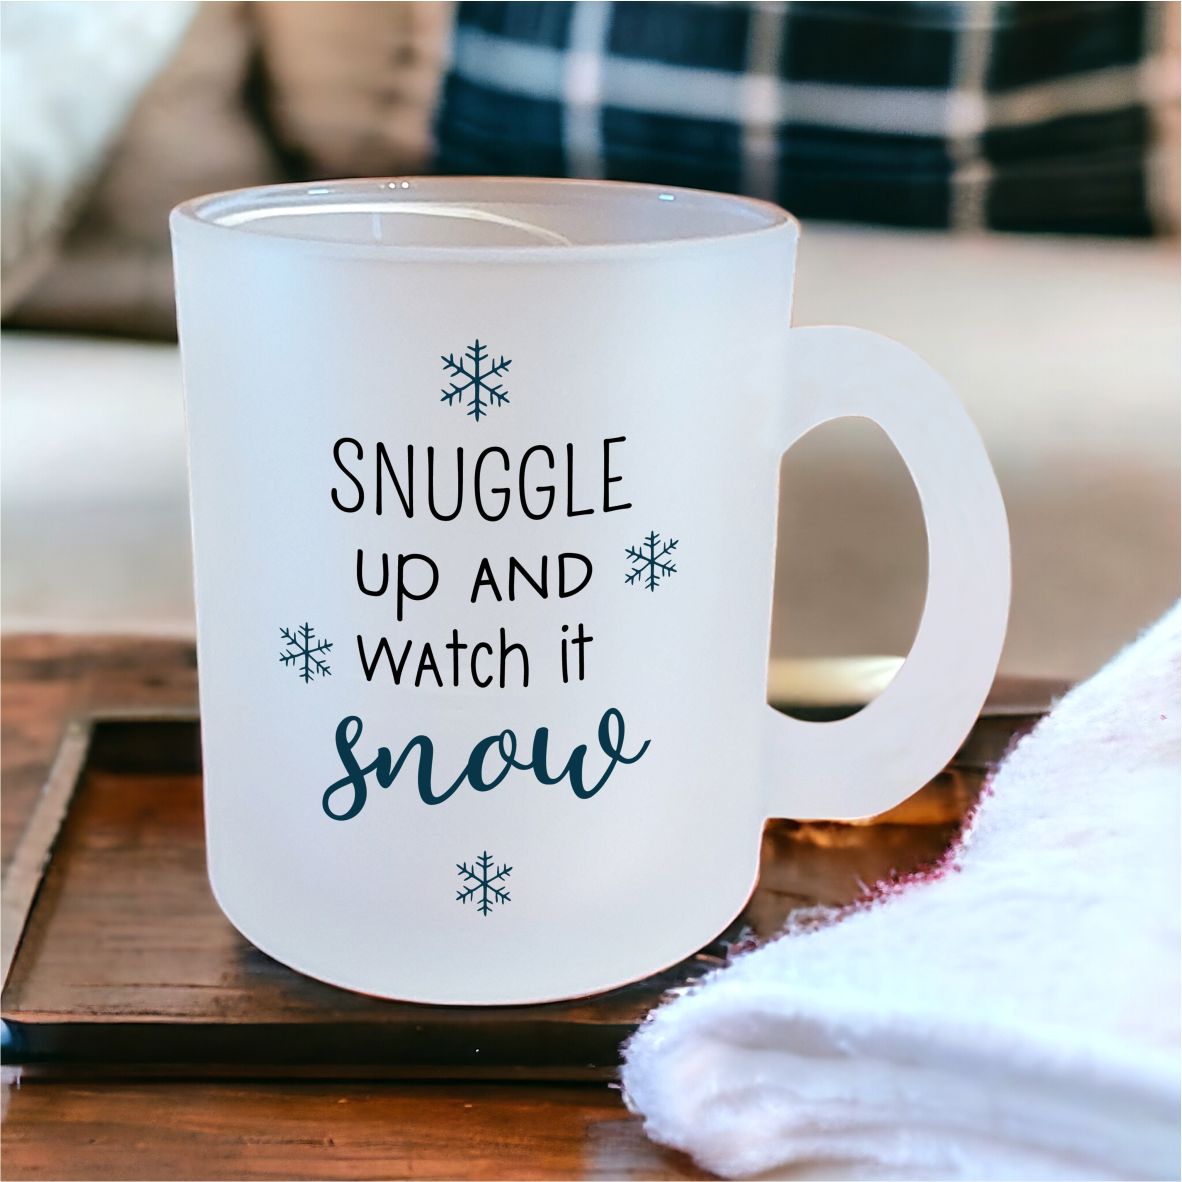 Glastasse "Snuggle up and watch it snow"